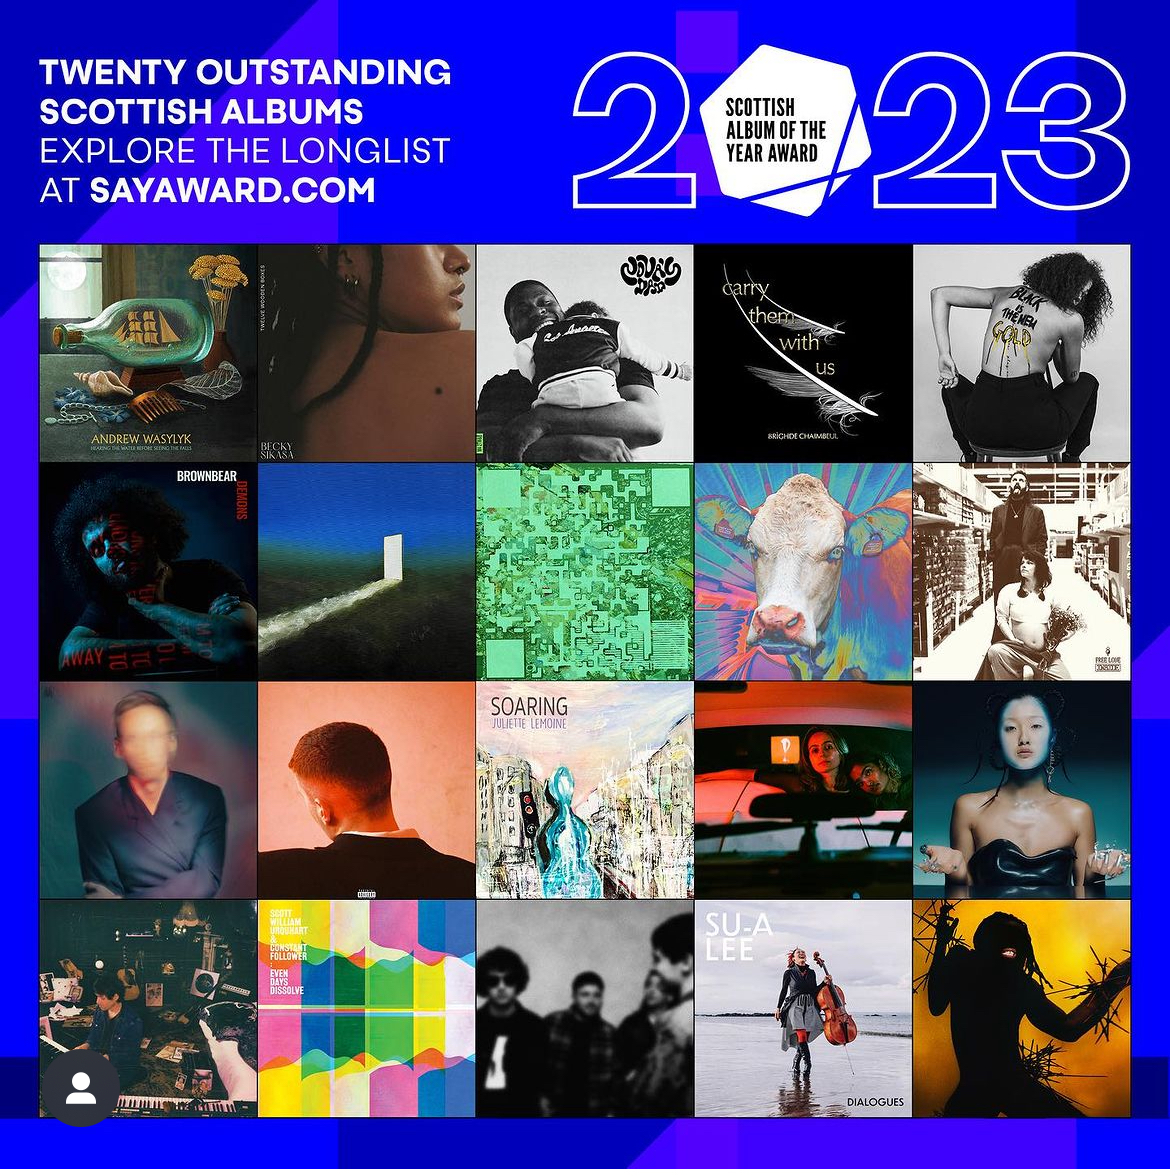 Happy Burns Night! 🥃 💙 Robert Burns inspired generations with his timeless works 🏴󠁧󠁢󠁳󠁣󠁴󠁿 ✨ Celebrate Scottish creativity by soundtracking your Burns Night to the 20 outstanding Scottish albums Longlisted for the 2023 #SAYaward 👉 spoti.fi/4b6JBT7 #BurnsNight